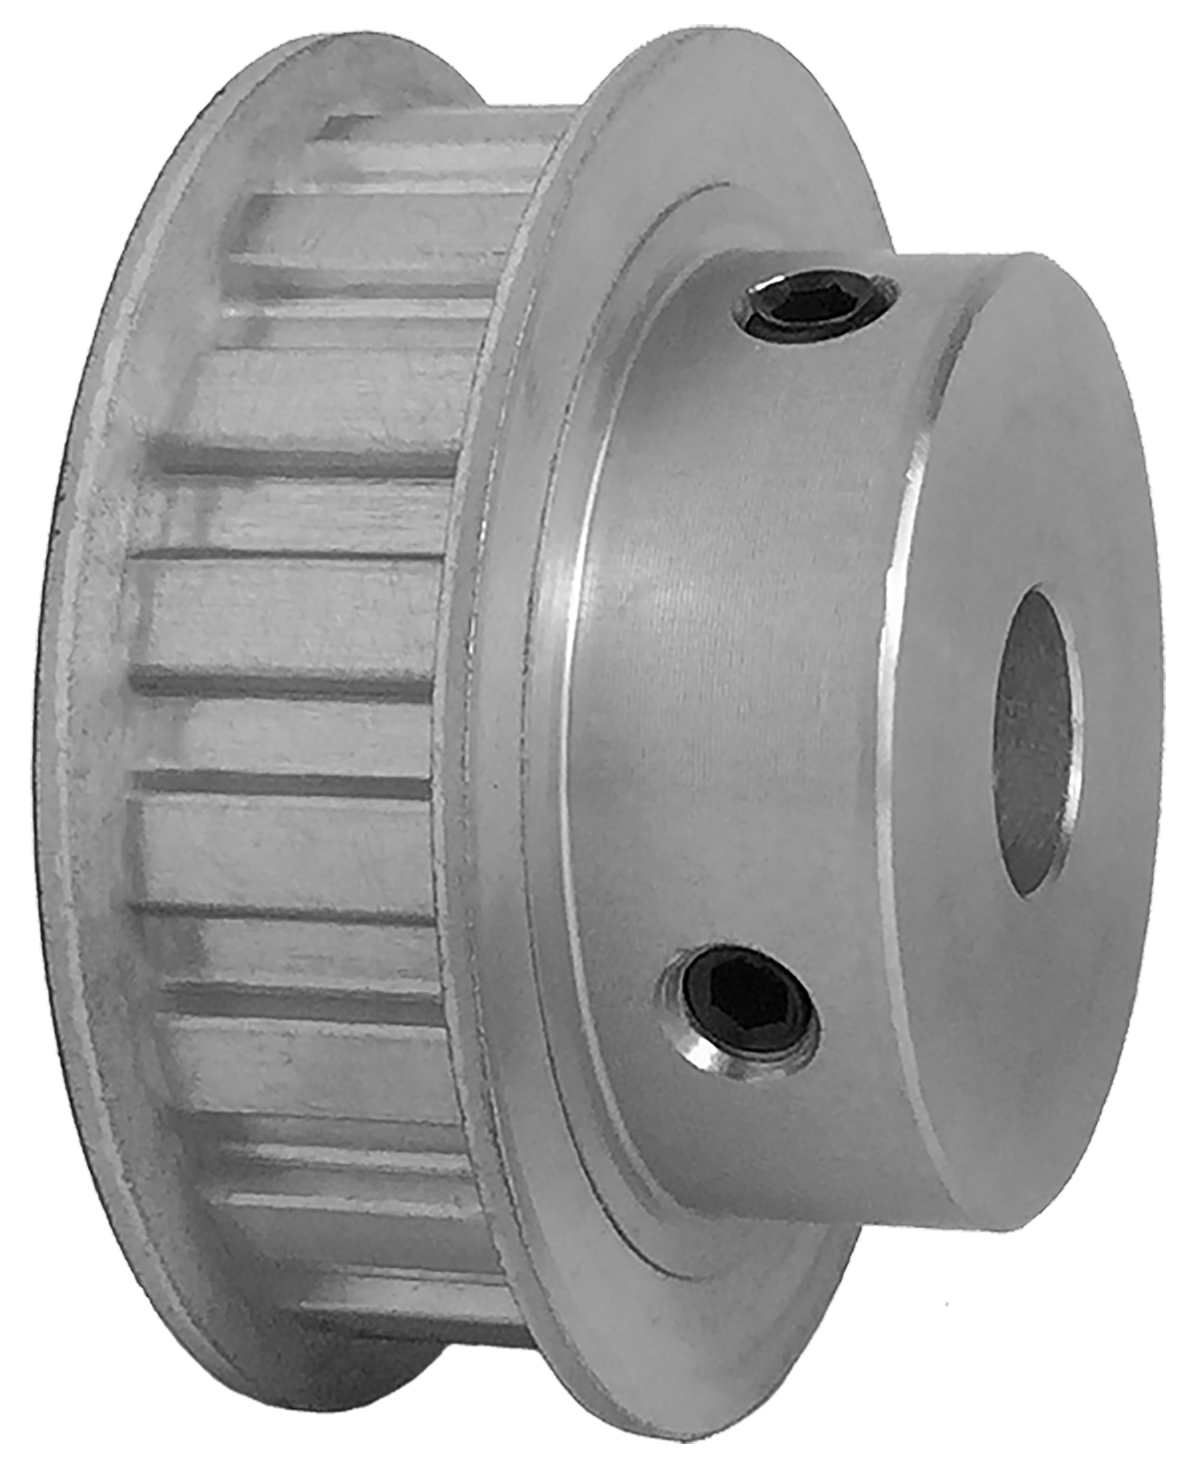 18L050-6FA6 - Aluminum Imperial Pitch Pulleys